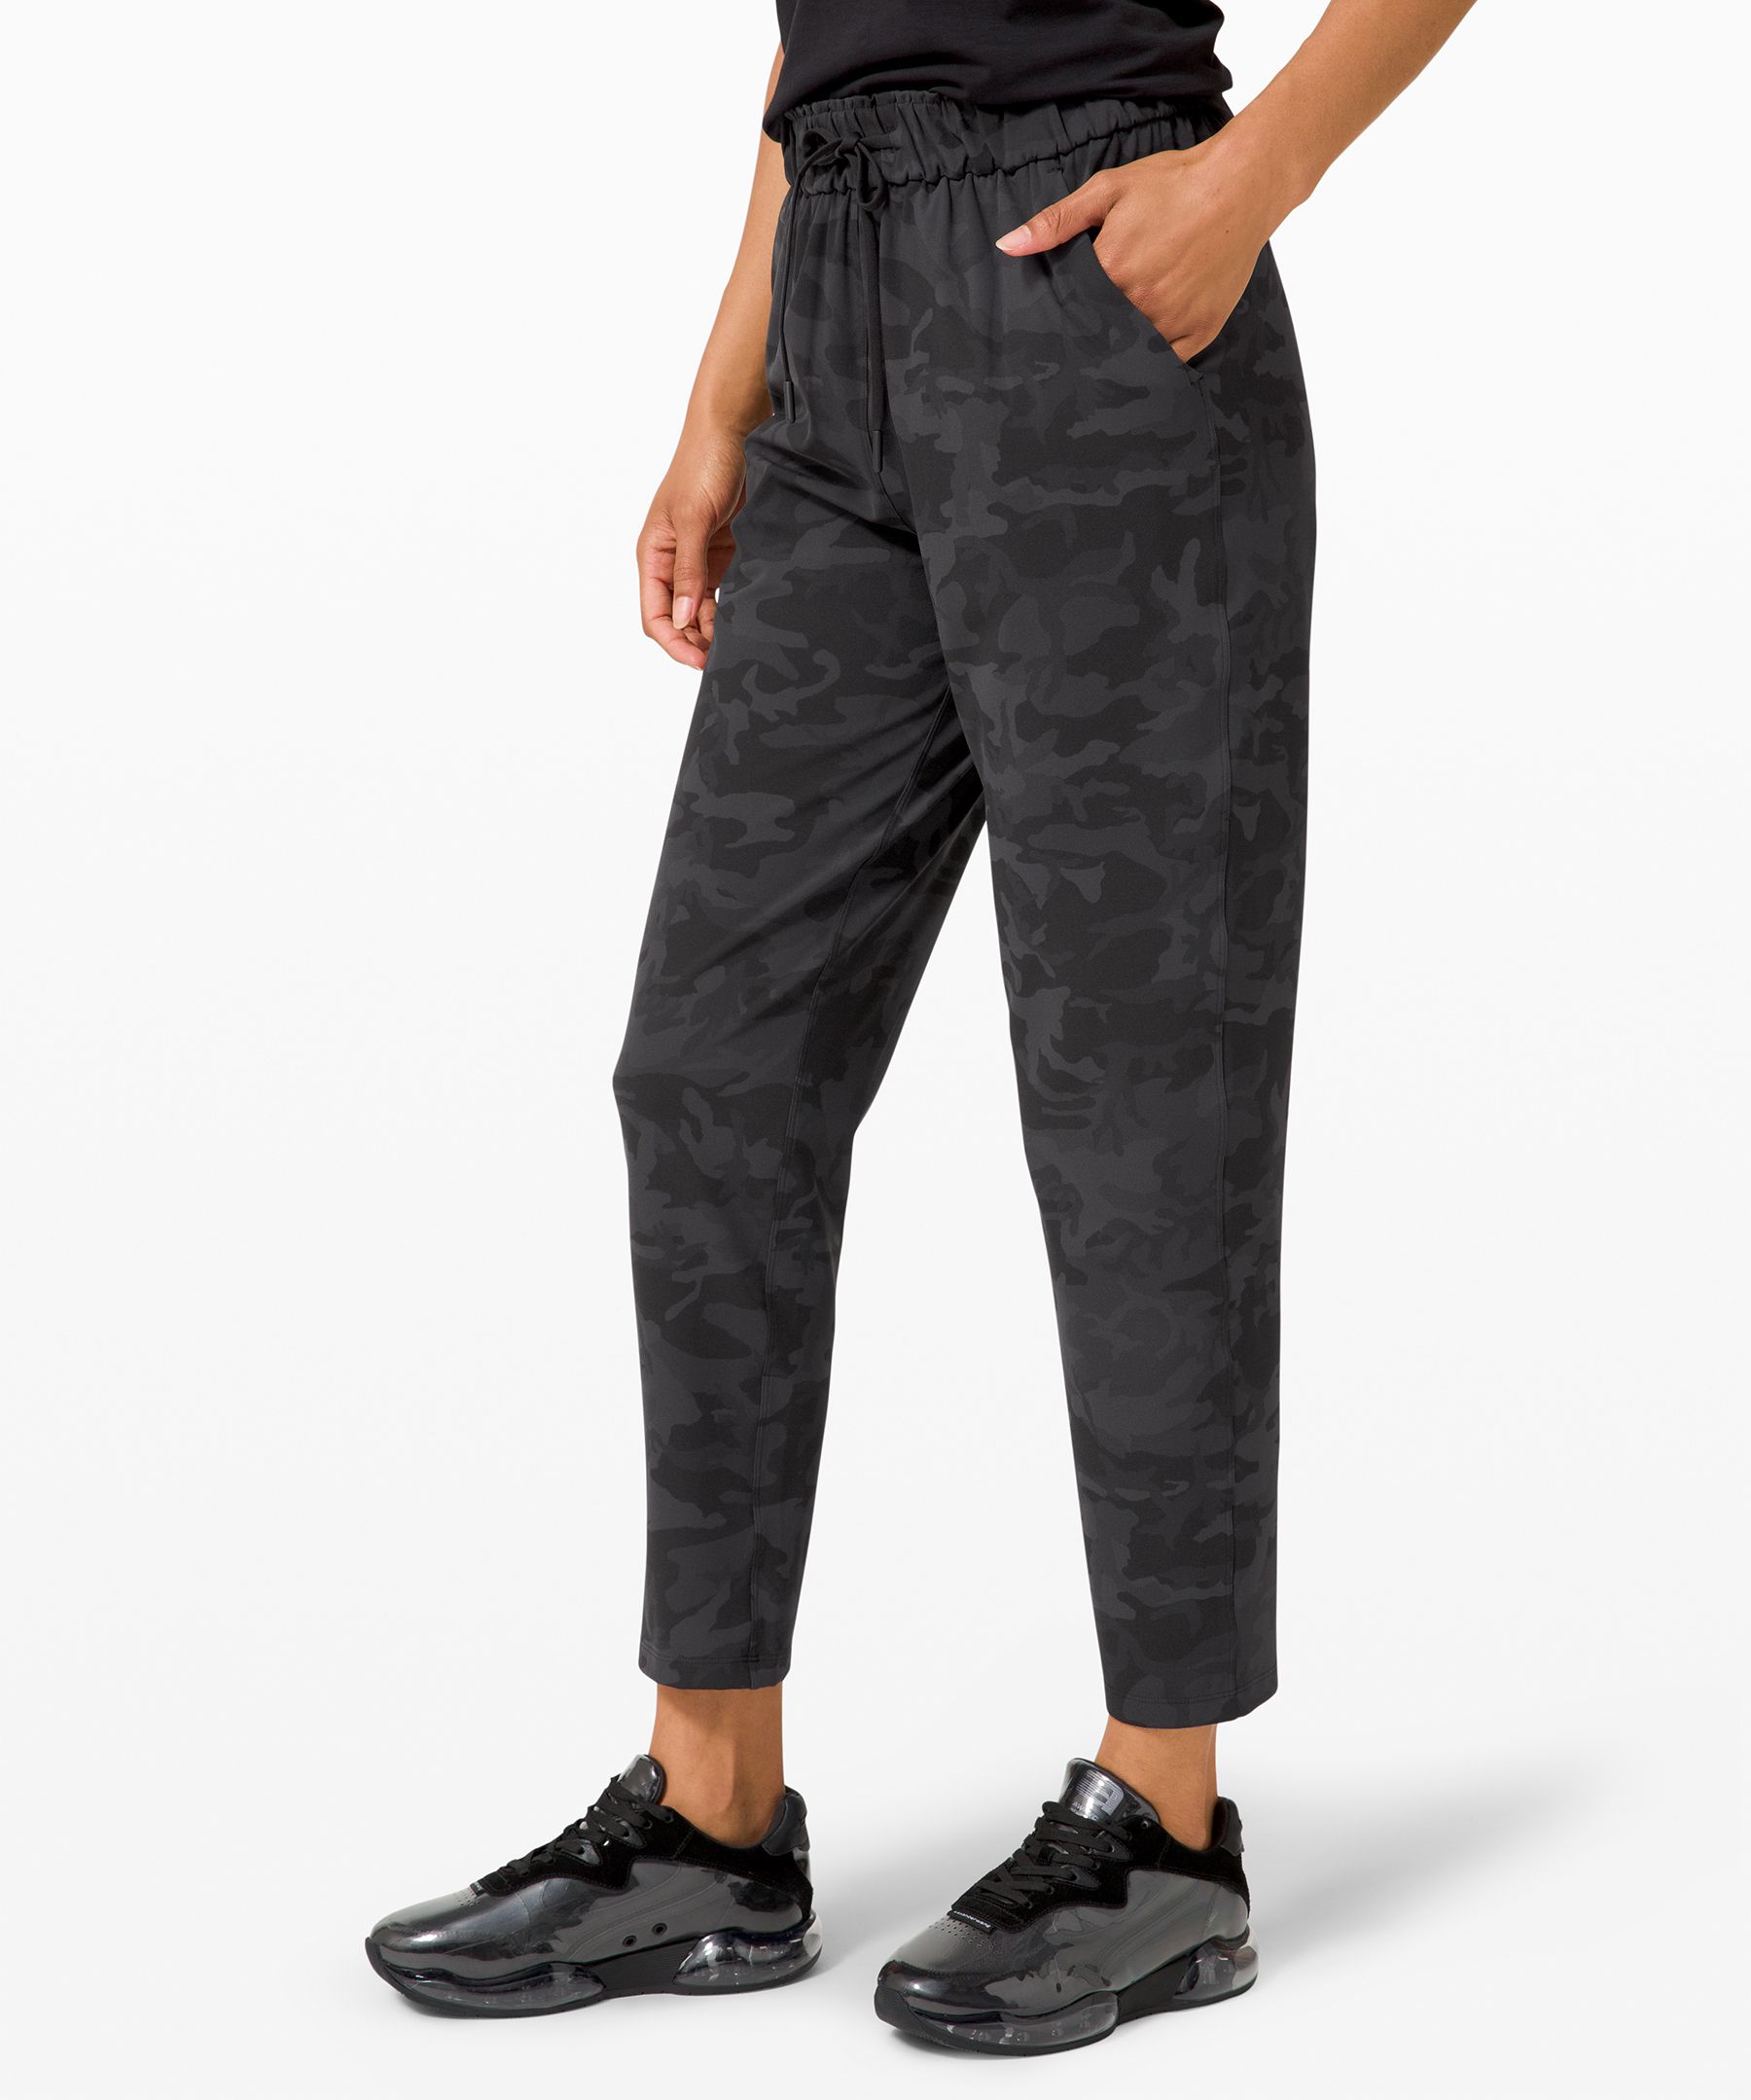 lululemon pants stretched out